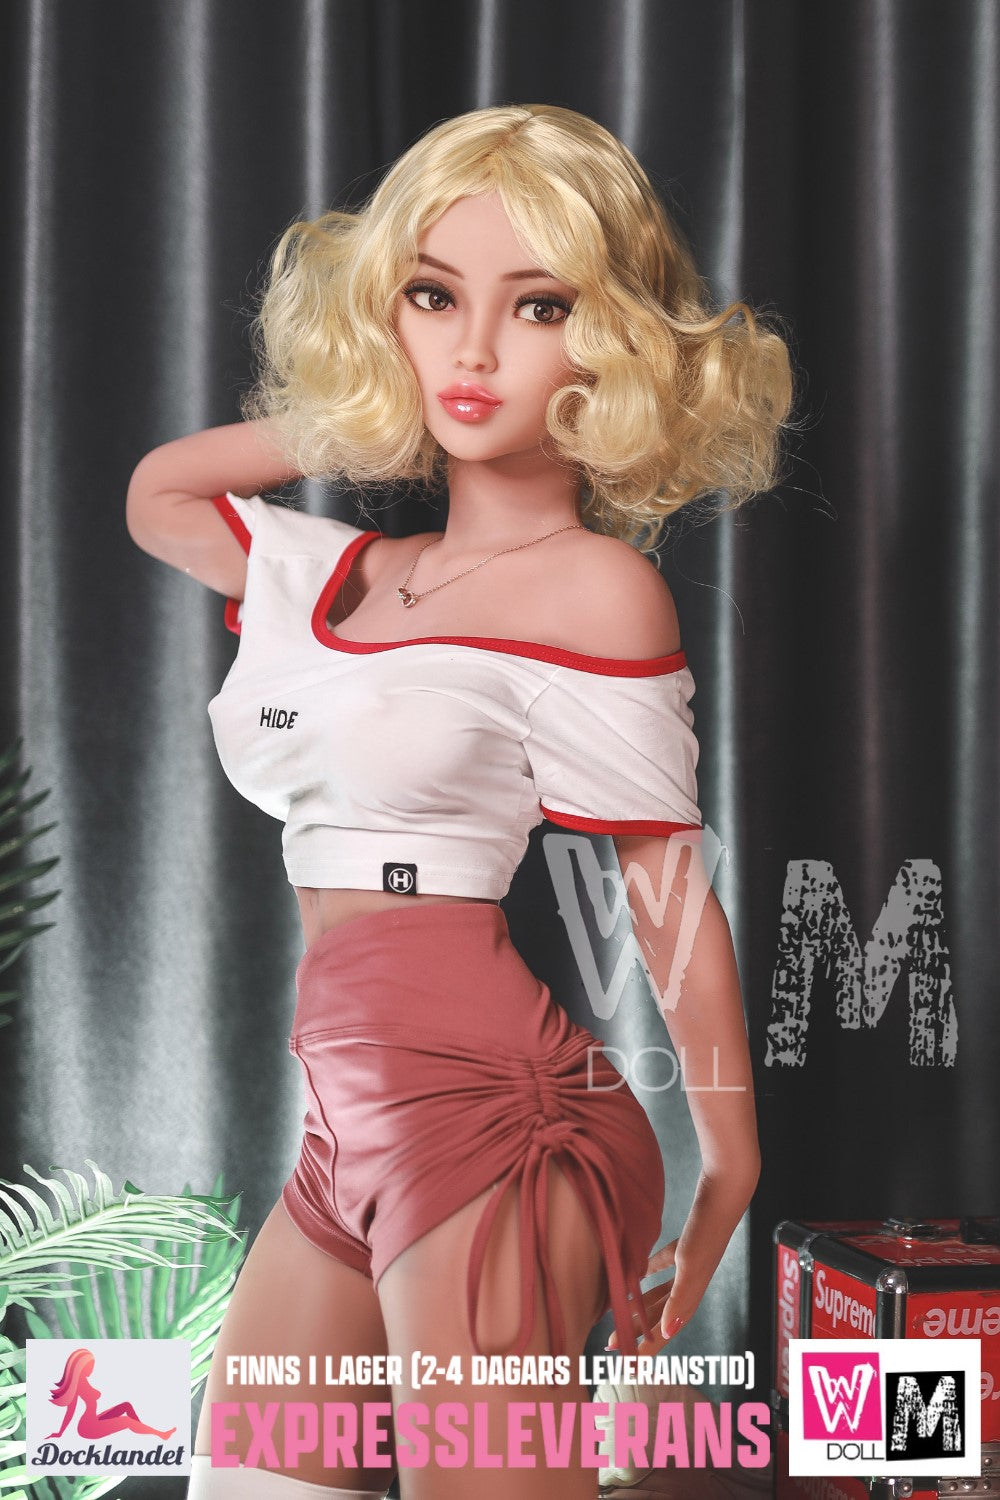 Marilyn sexpuppe (WM-Doll 141 cm d-cup #369 tpe) EXPRESS